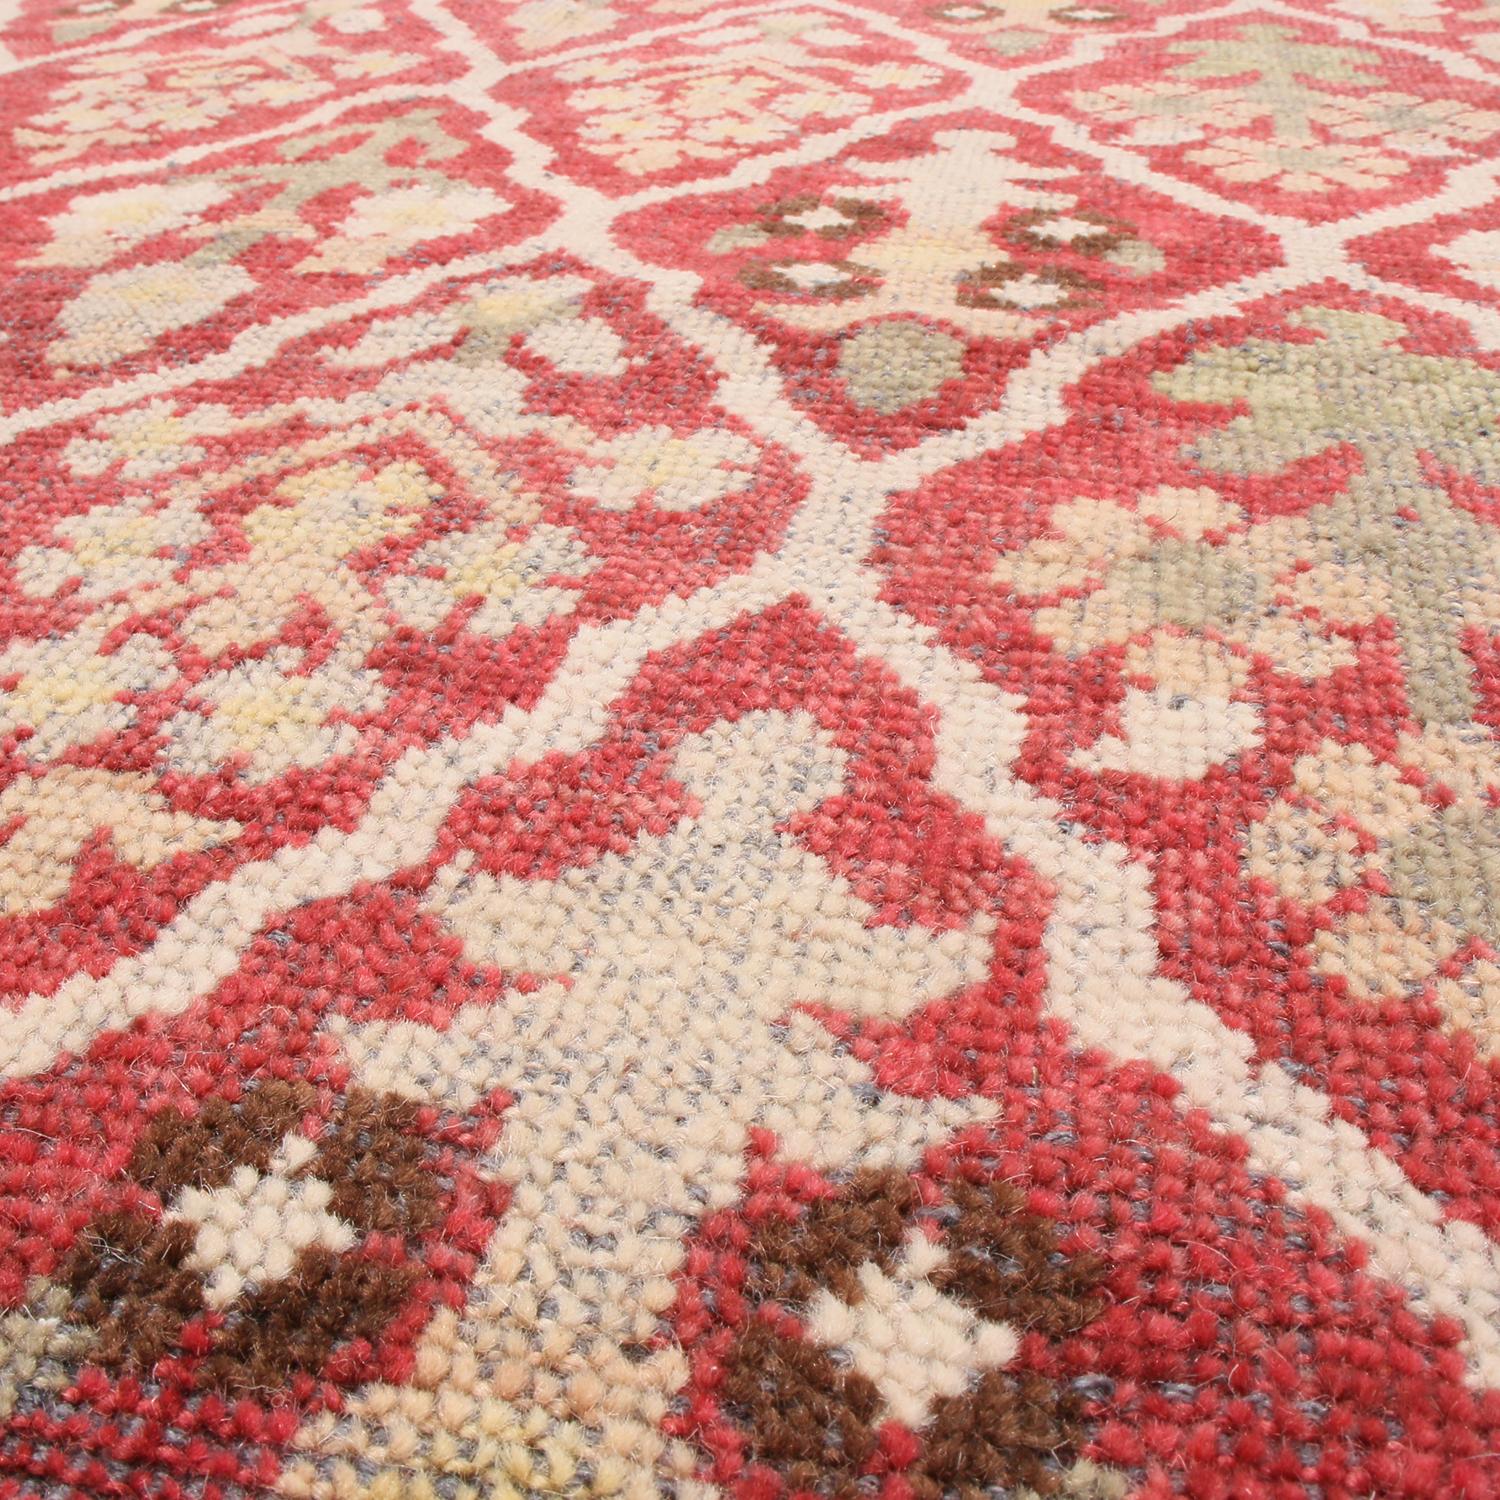 Rustic Burano Beige and Burgundy Red Wool Rug with Green Accents